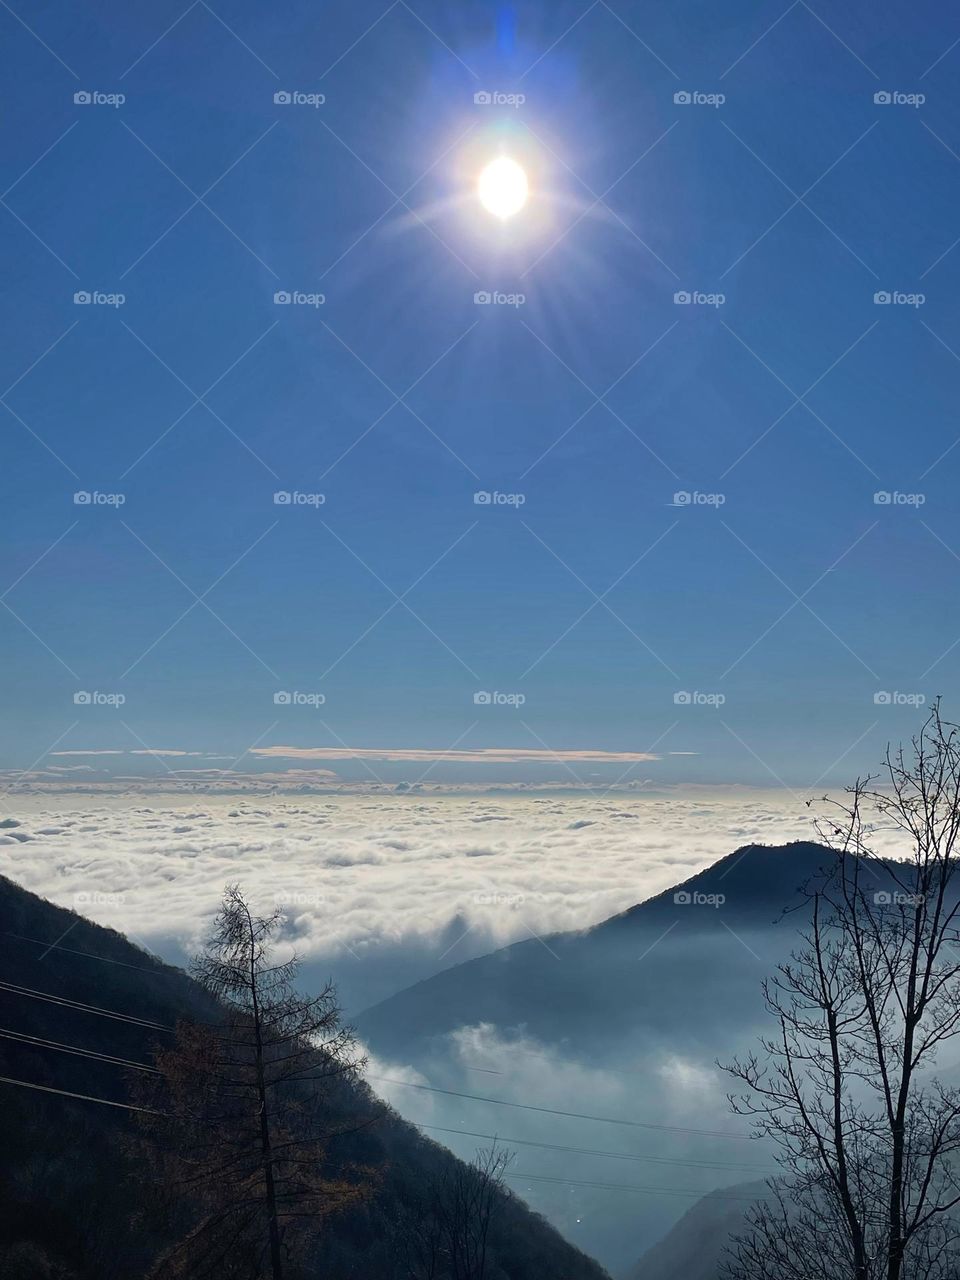 sun above the clouds, panorama from a mountain peak on a sunny day under a clear blue sky